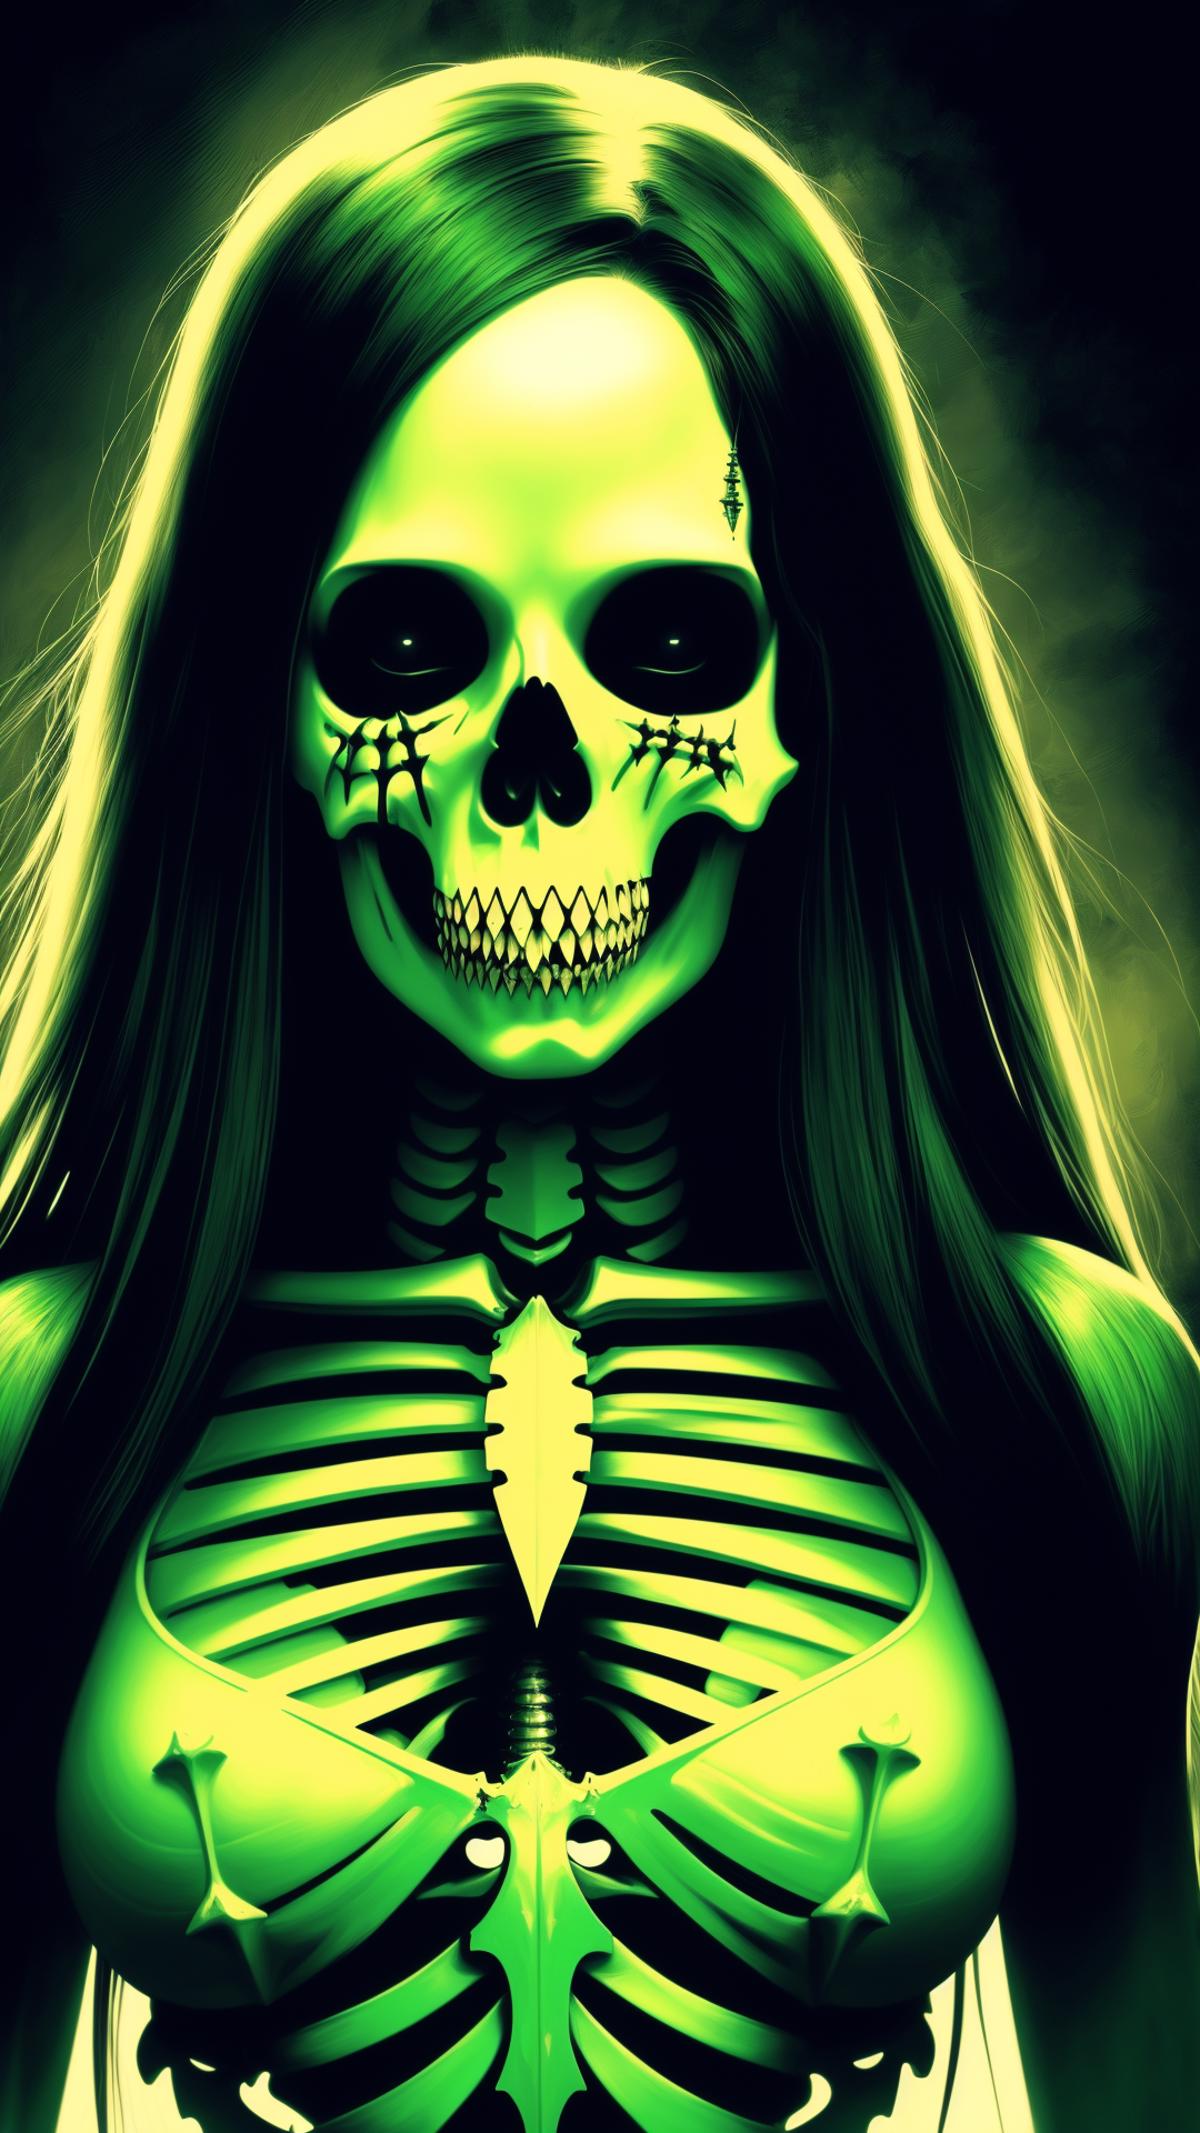 A woman with a green skeleton head and green bones.